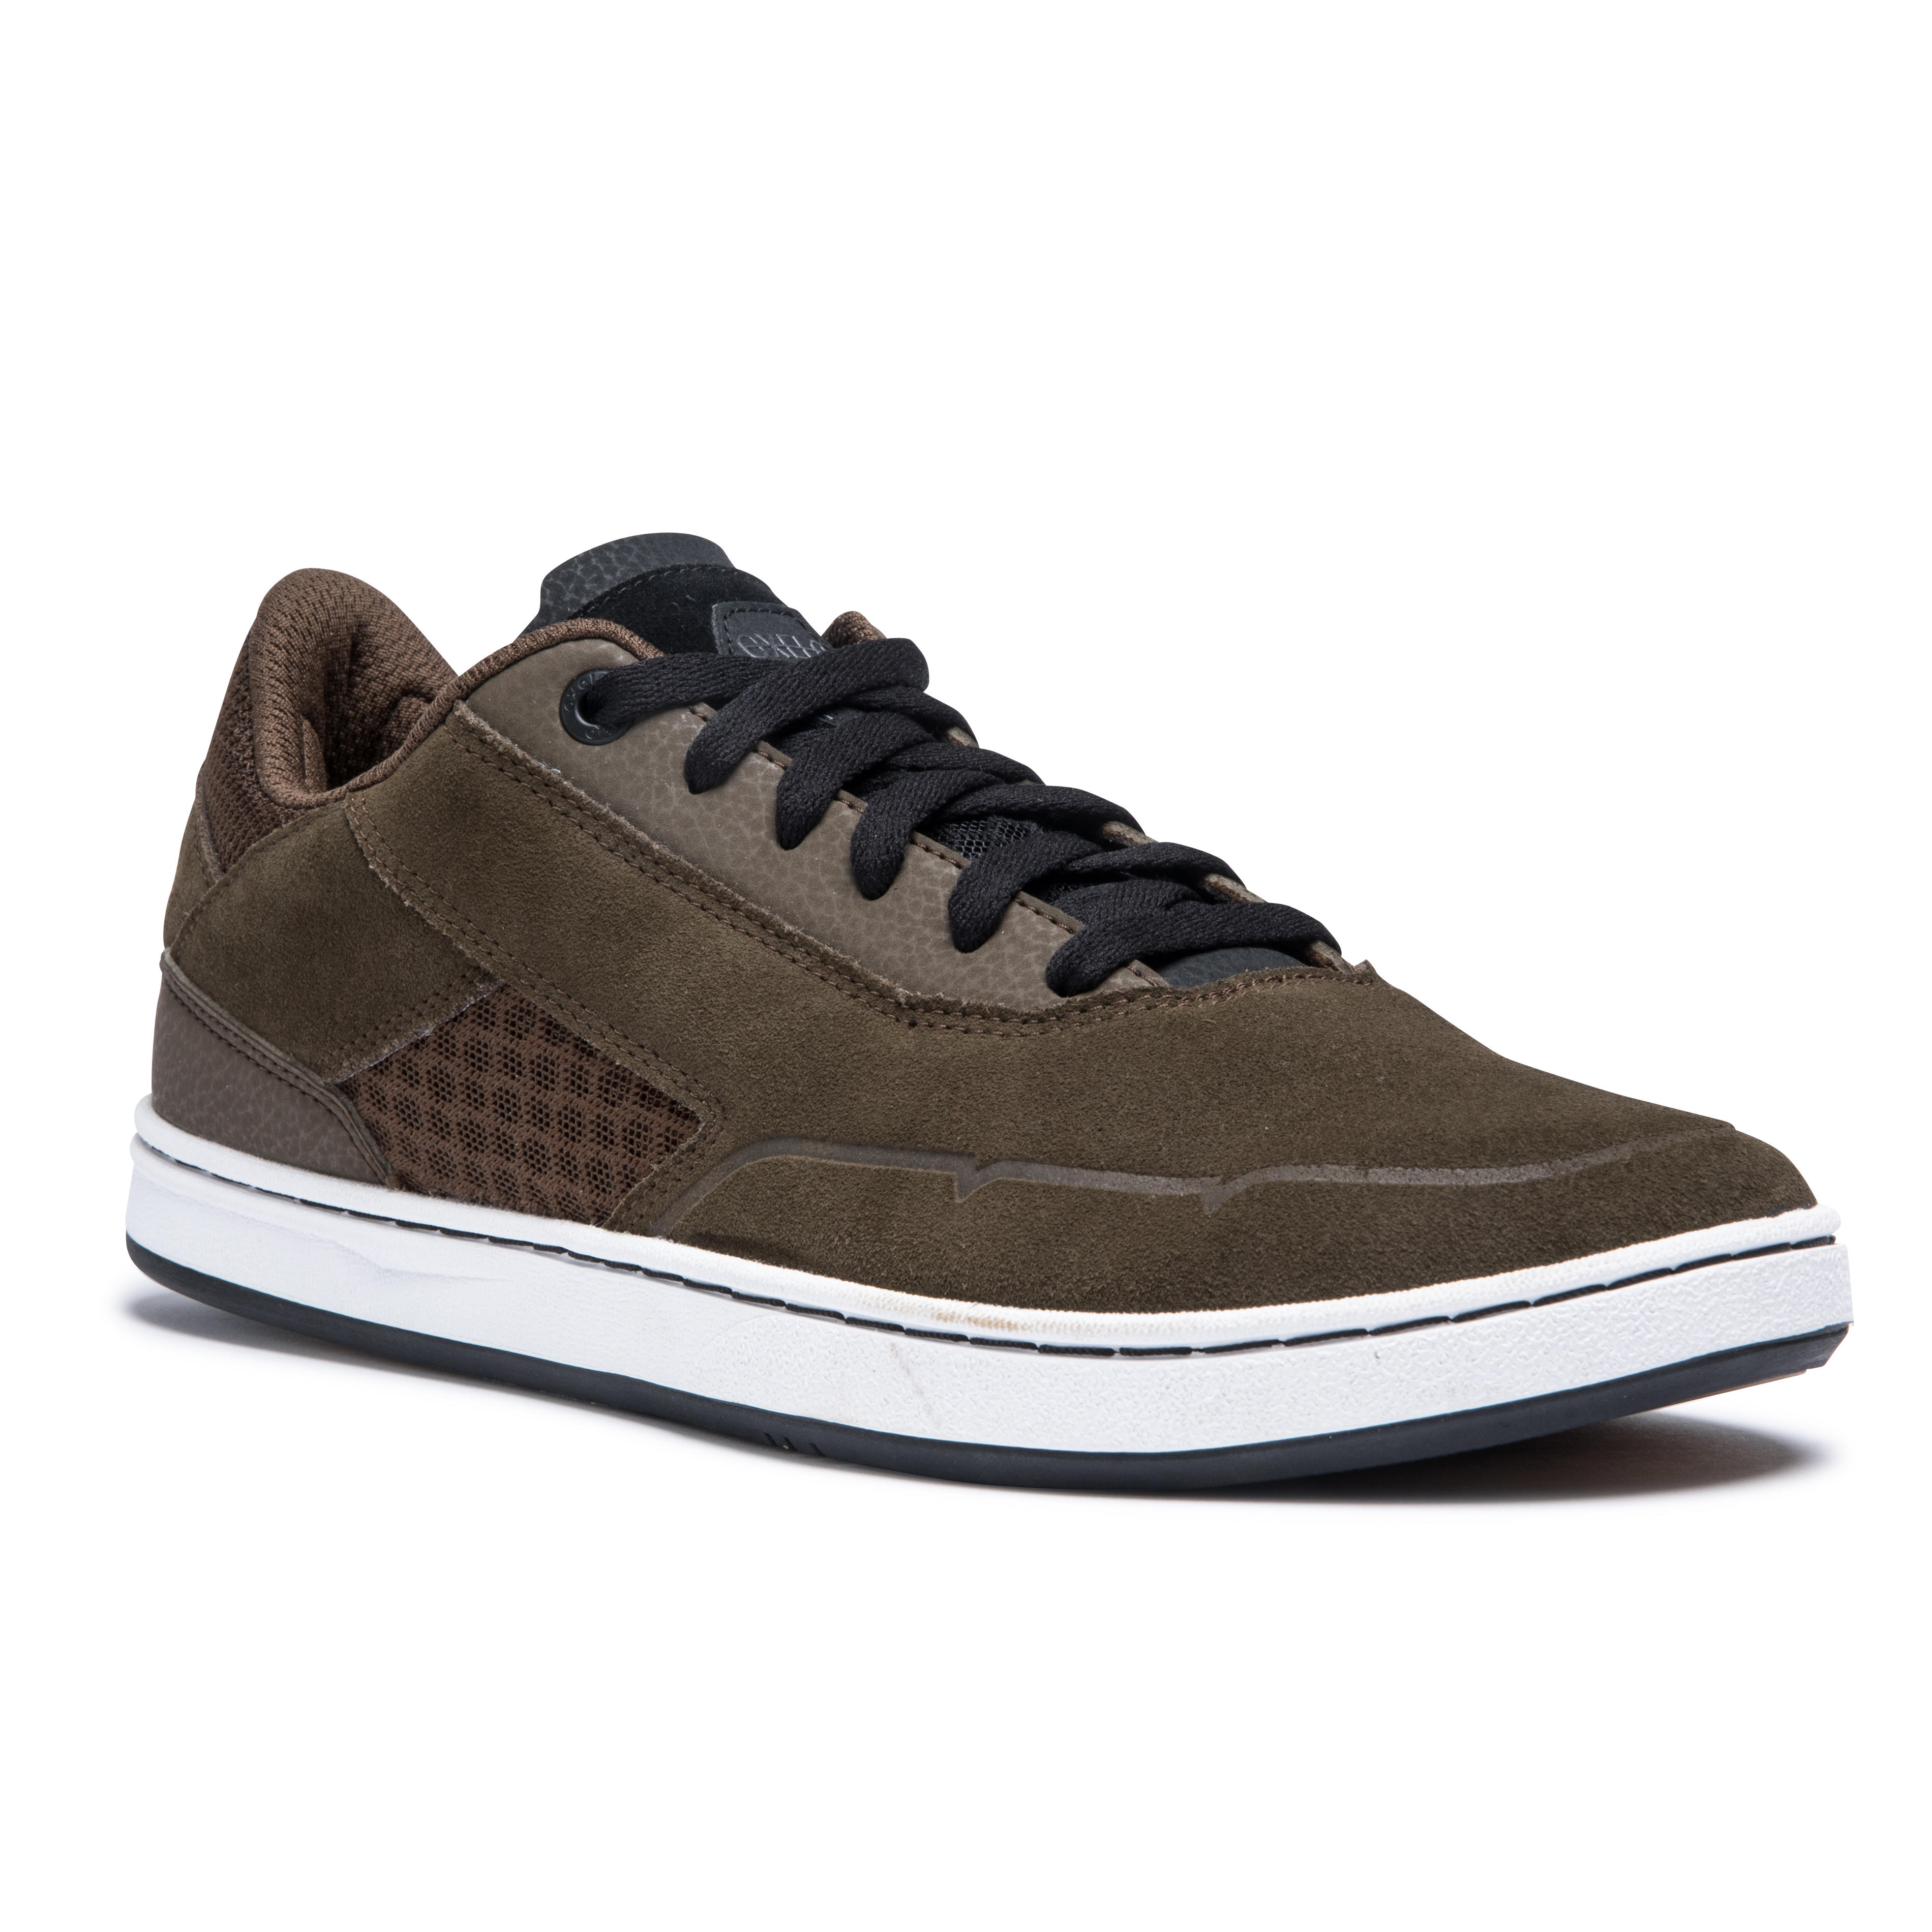 Crush 500 Adult Low-Top (Cupsole) Skate Shoes Oxelo - Decathlon